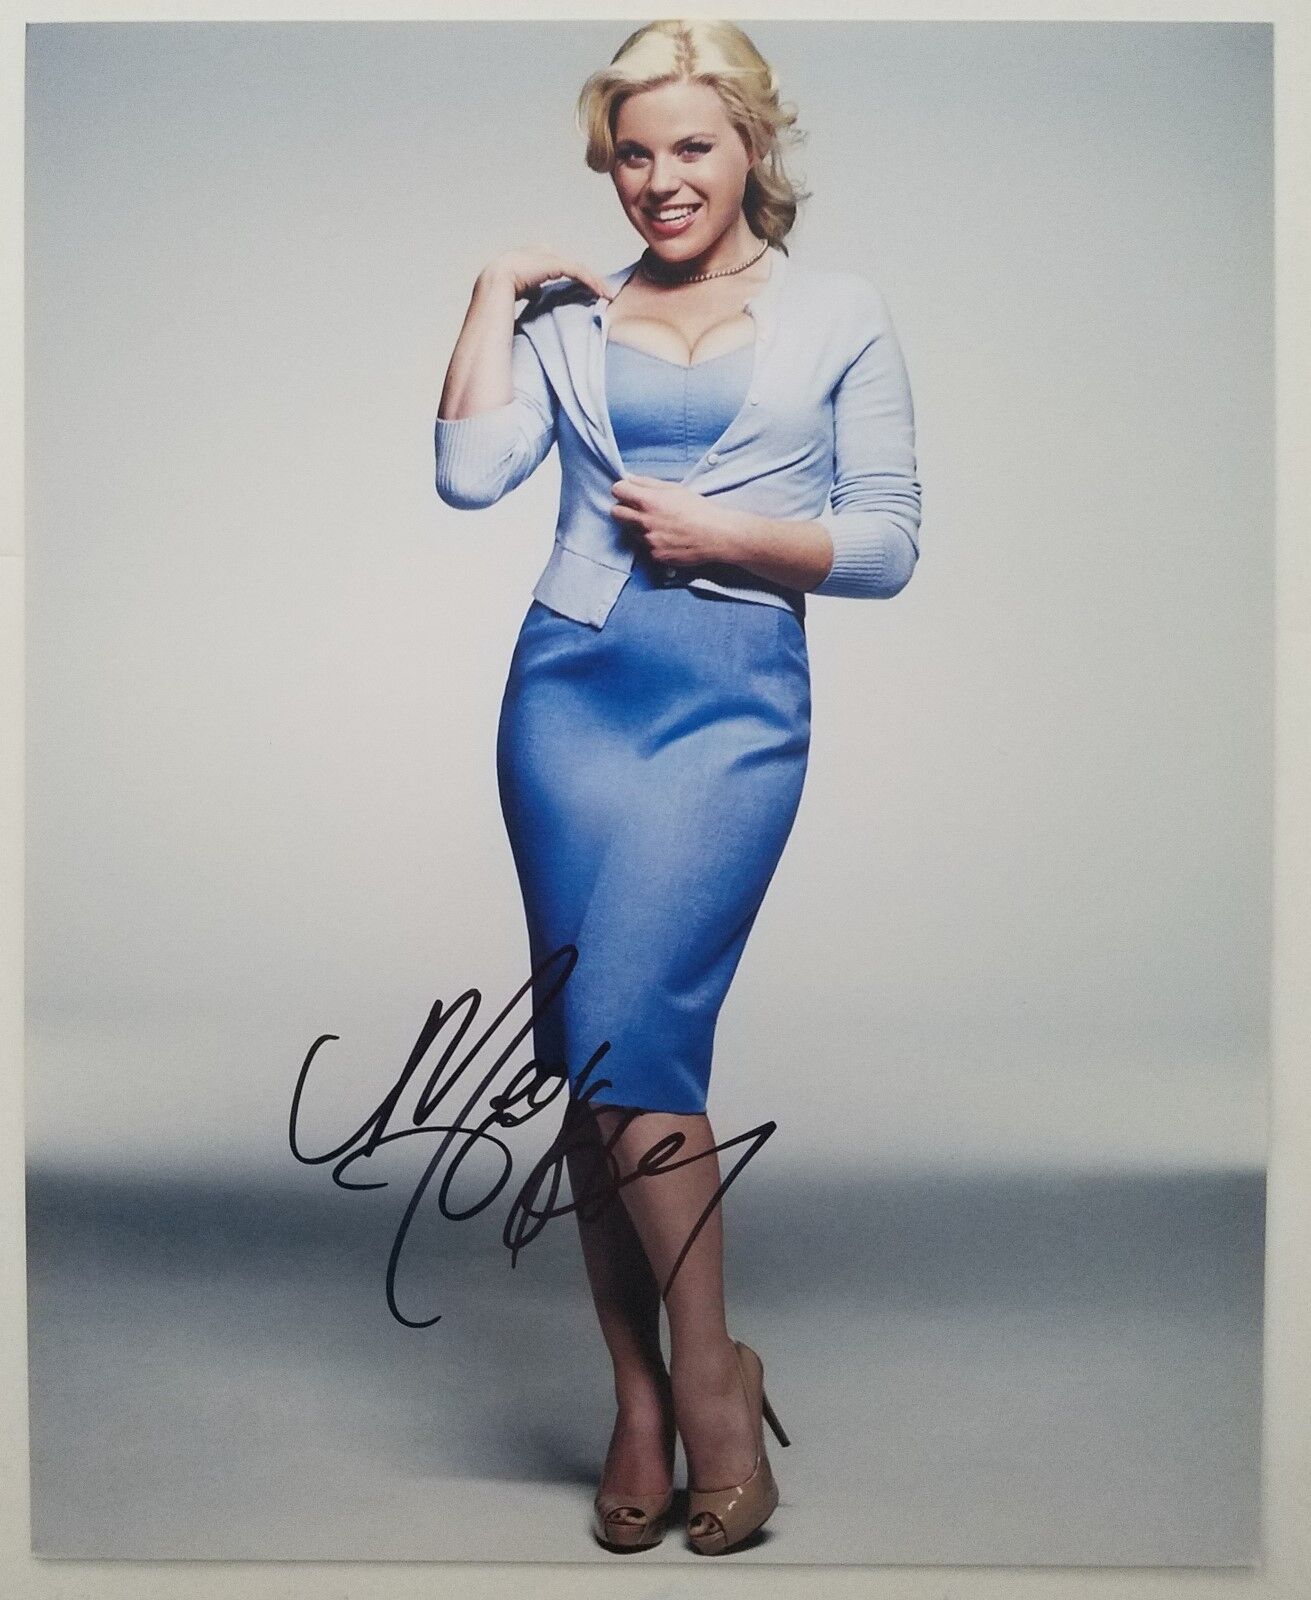 Megan Hilty Signed 8x10 Photo Poster painting Actress Broadway Smash Wicked Playbill RAD